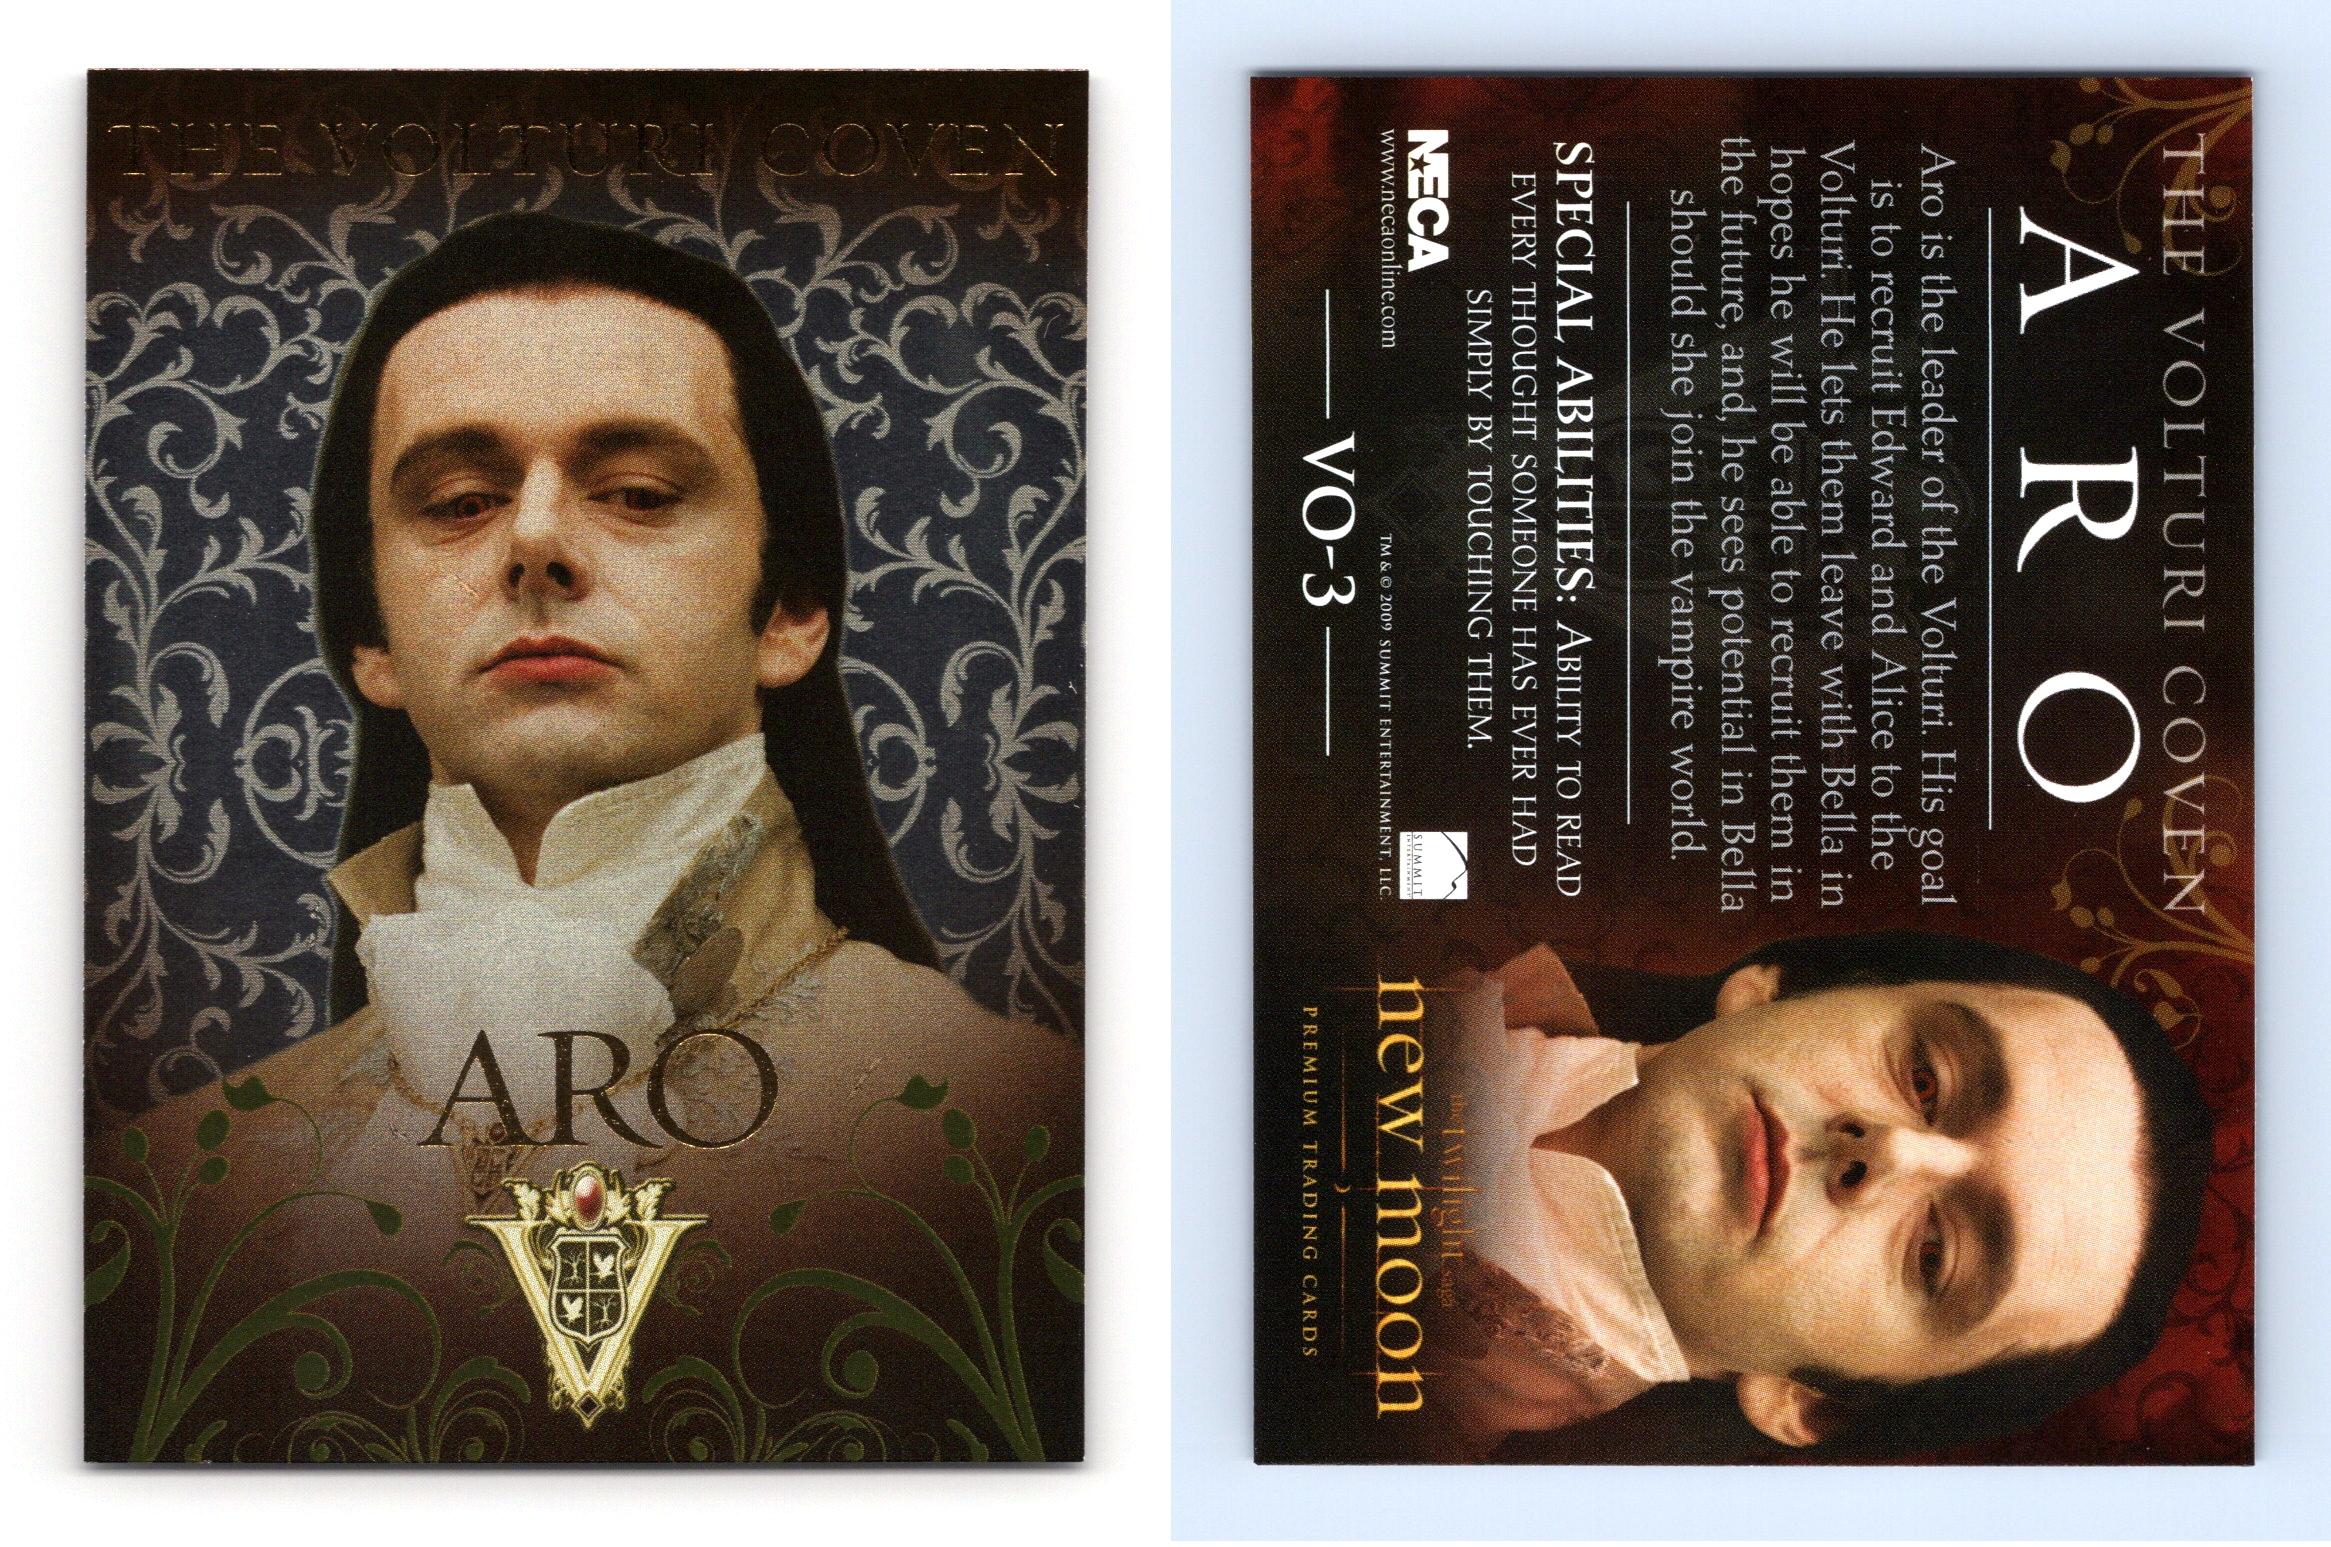 Twilight New Moon Card the Volture Coven Aro #Vo-3